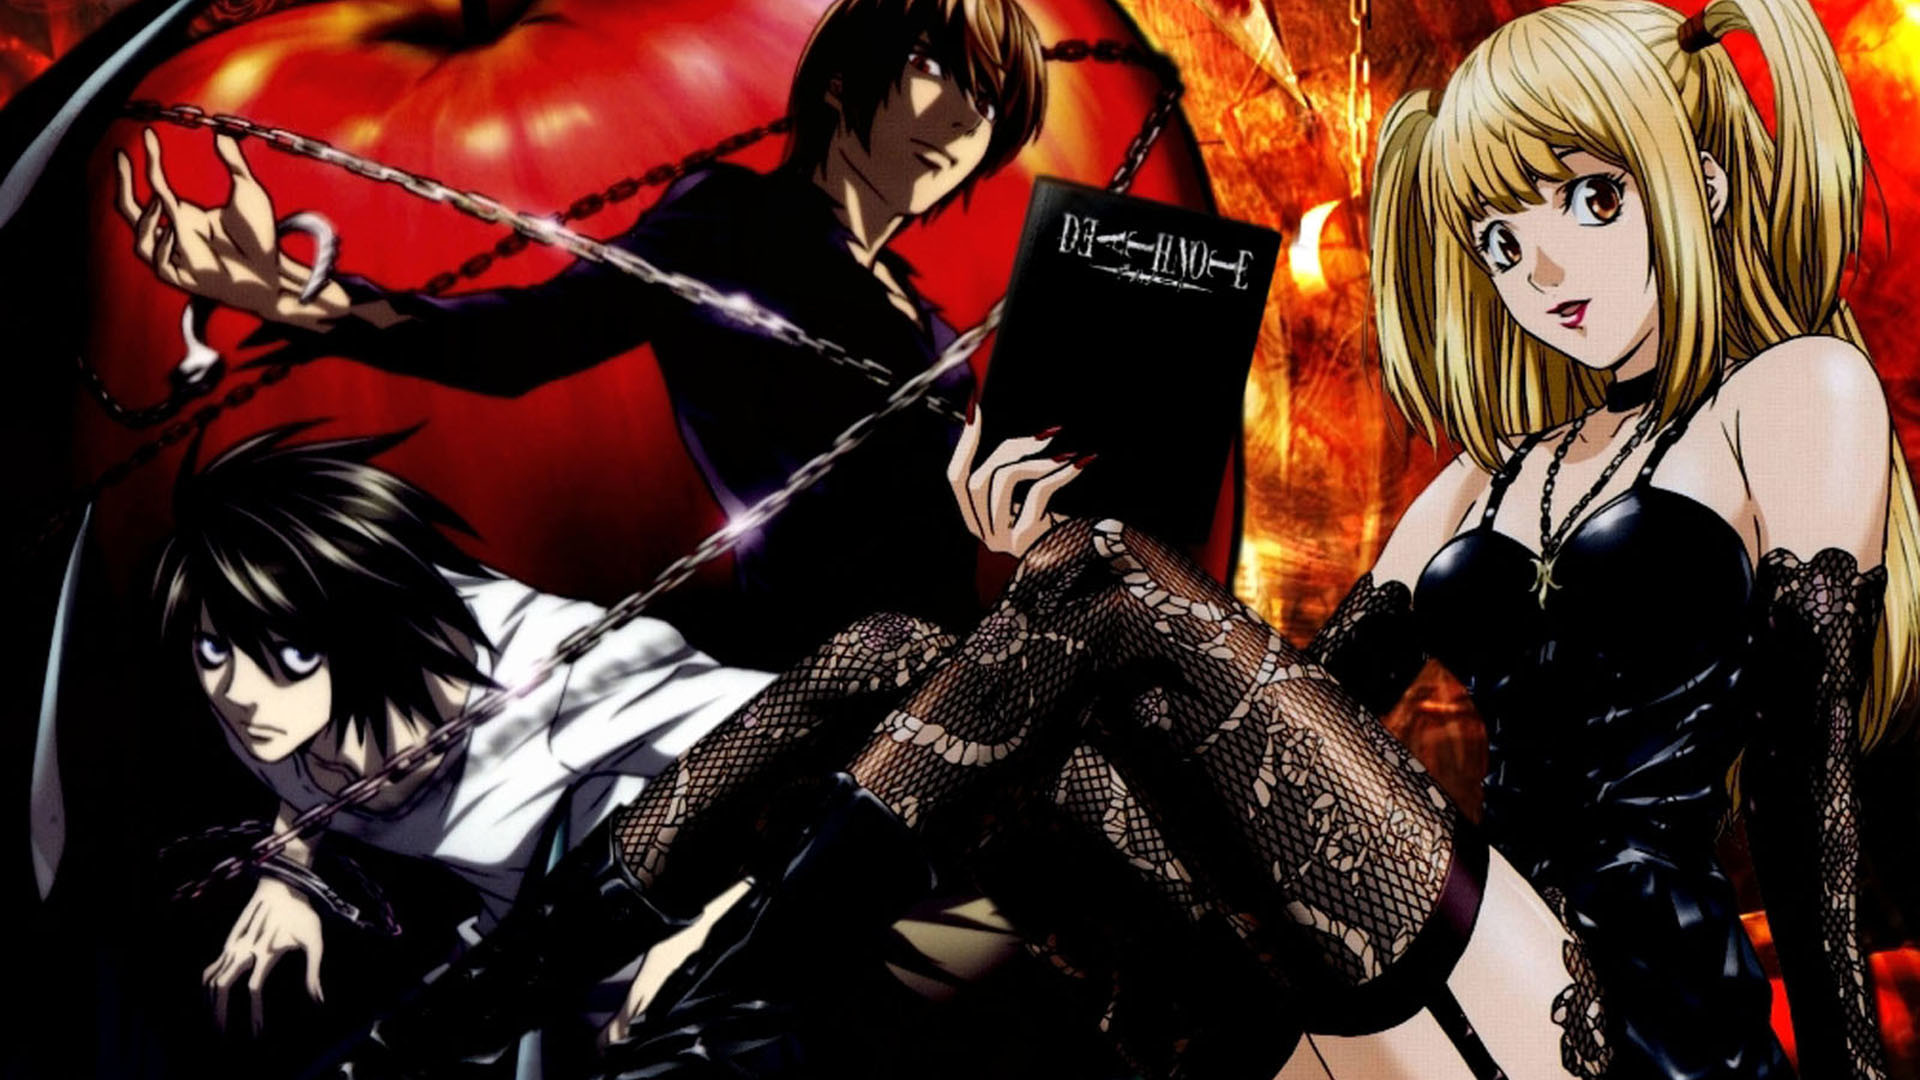 1920x1080 Death note, one of the best anime I've ever seen. | Digital Art | Pinterest  | Death note, Wallpaper and Wallpaper backgrounds